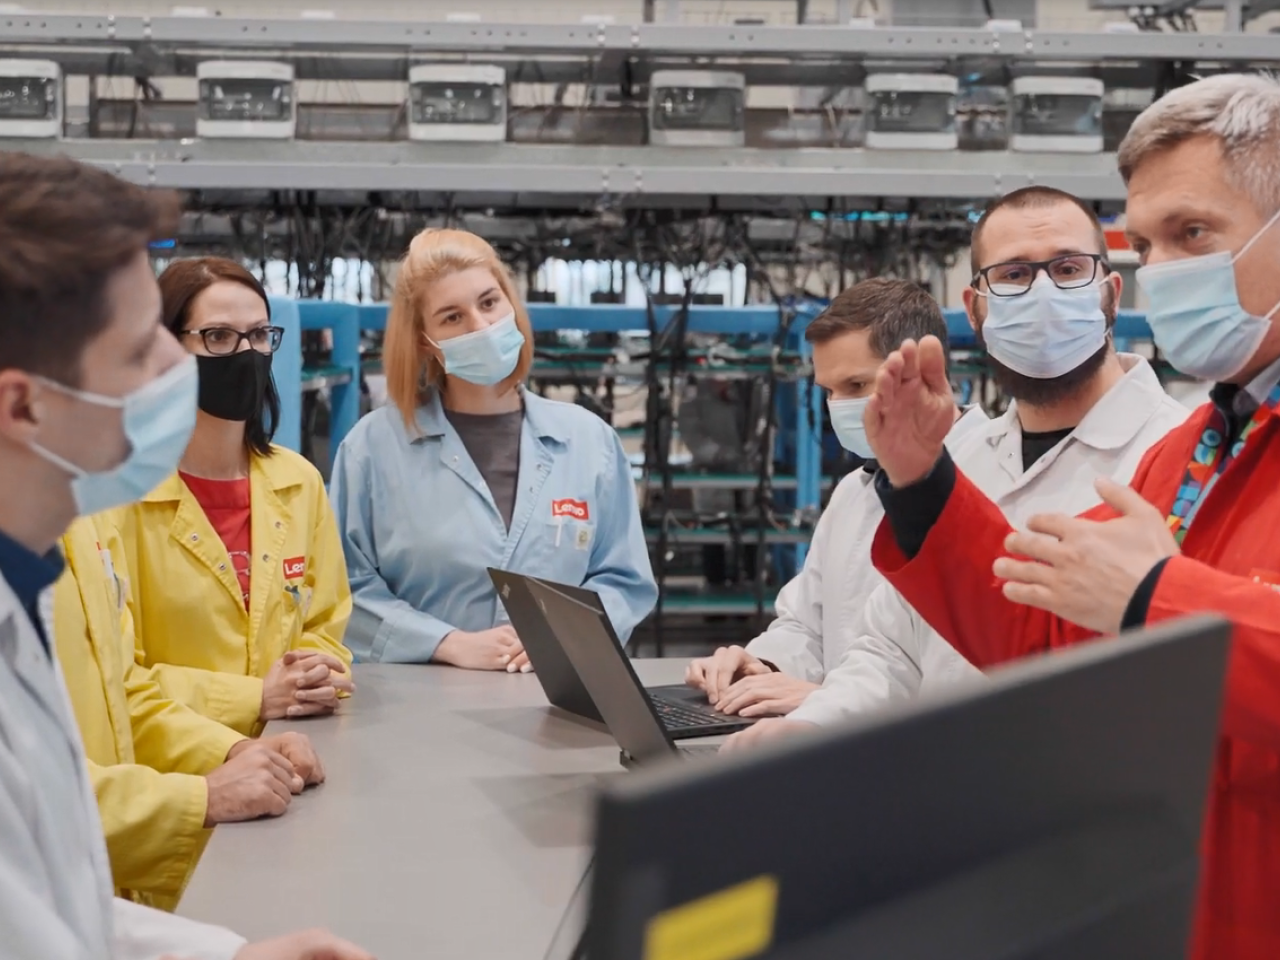 small group of people gathered around a table, all wearing protective masks and lab coats of different colors. Laptops open on the table. Factory machinery behind them.